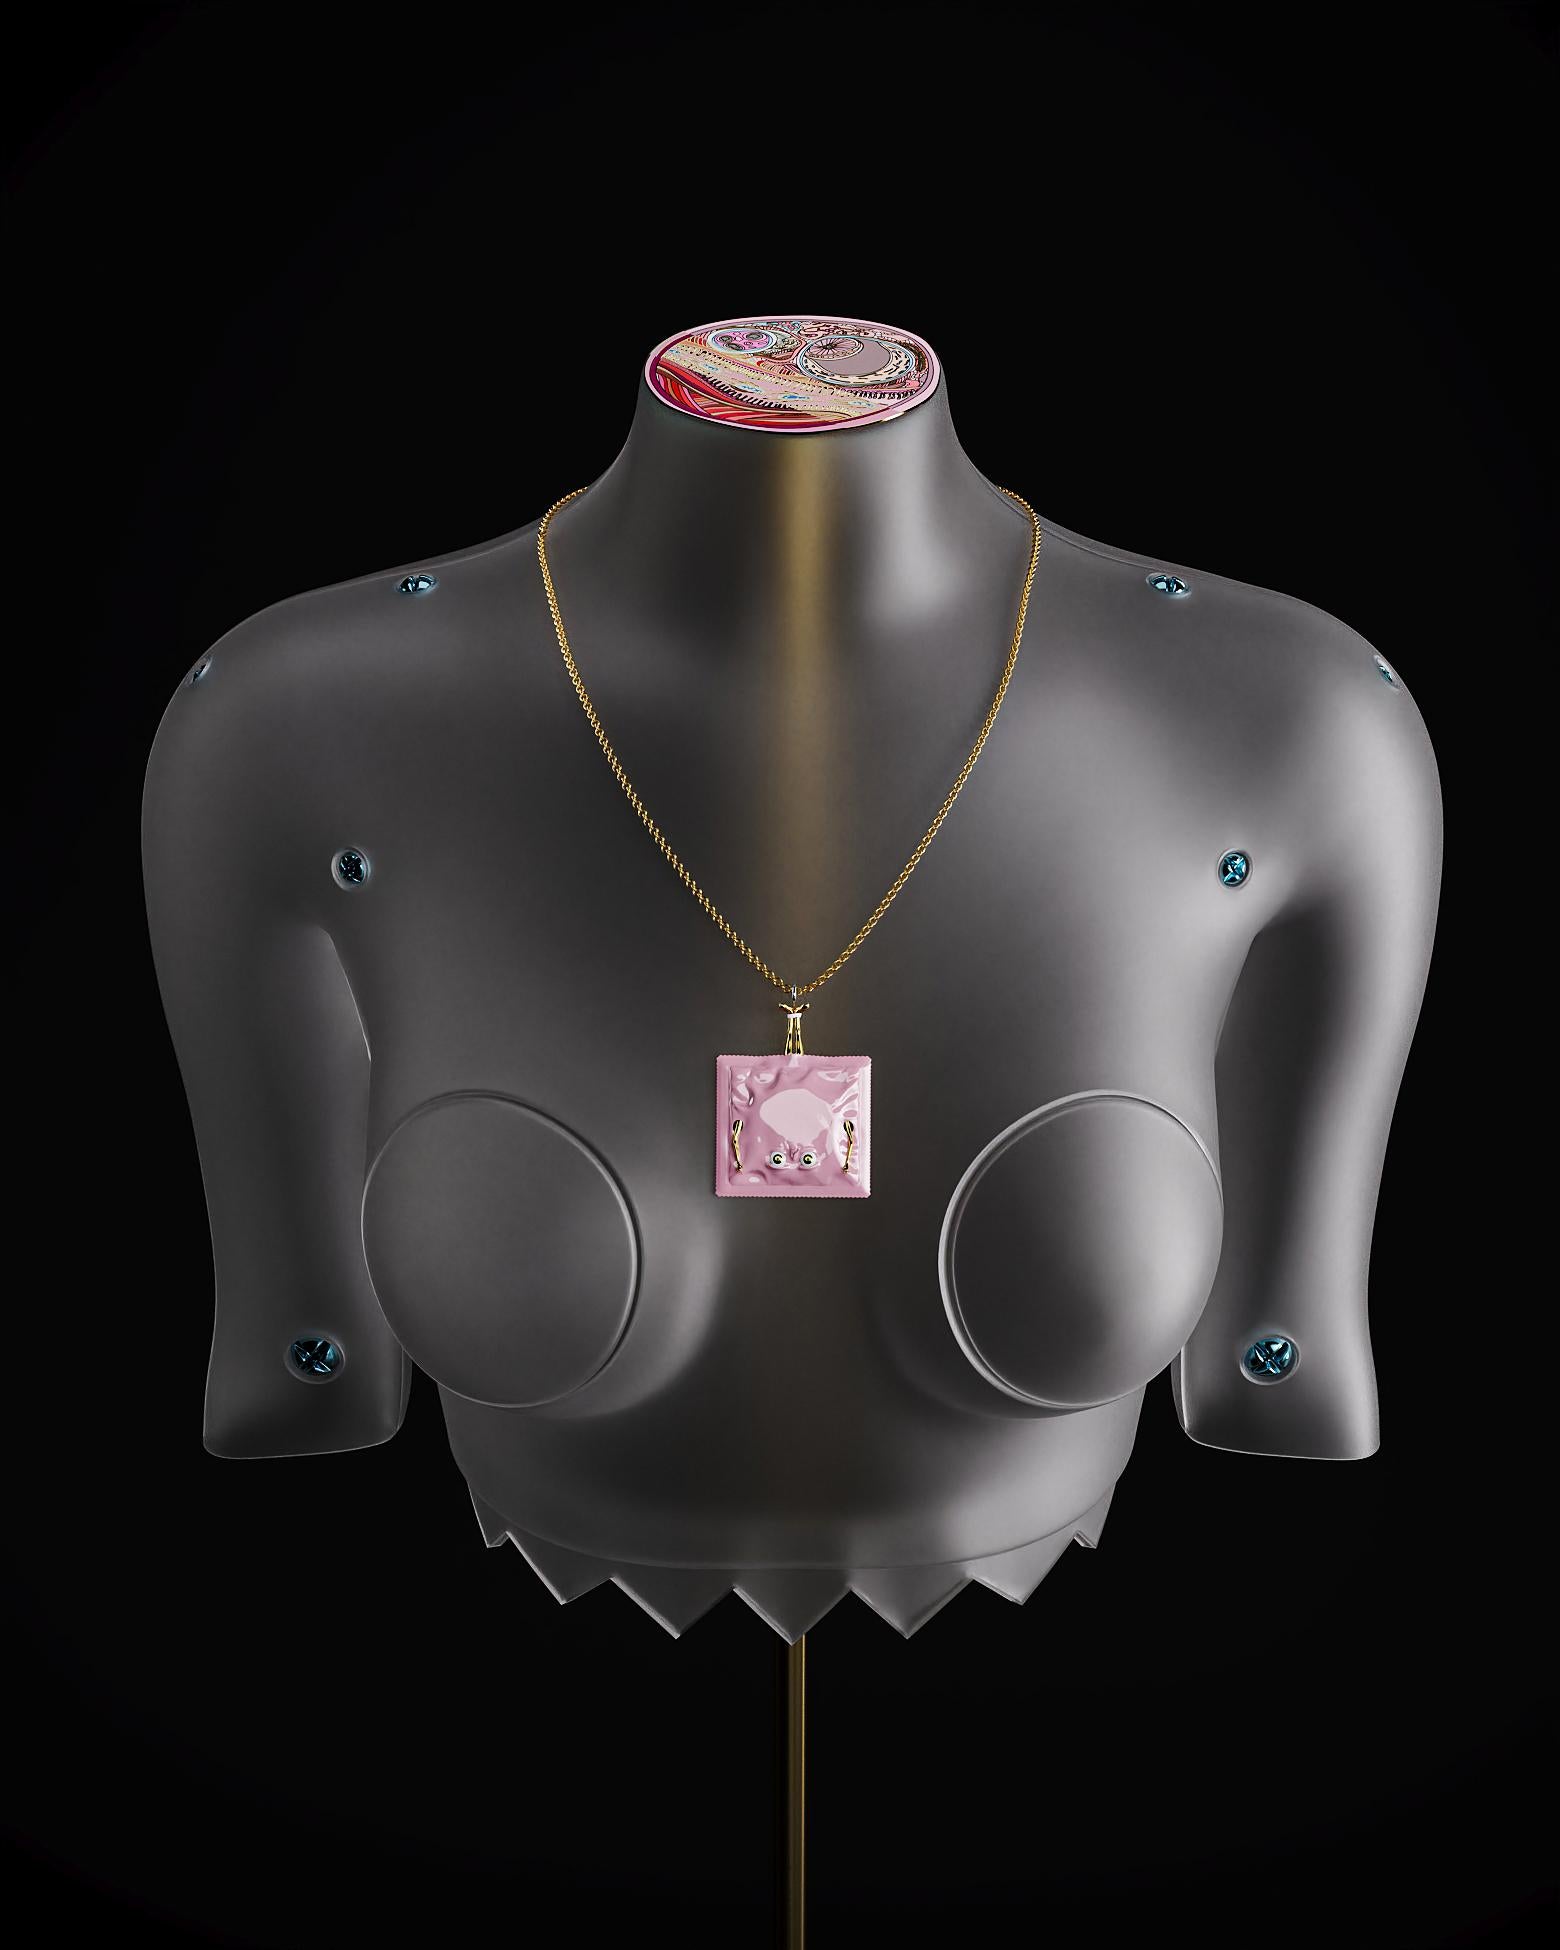 Cute condom is a collectible jewelry piece. In the Yoomoota Universe the so-called Cute condoms are a part of the gray clan that protects the Planet of Brands’ inhabitants (artists, painters, singers, actors, etc.) from scammers and unscrupulous